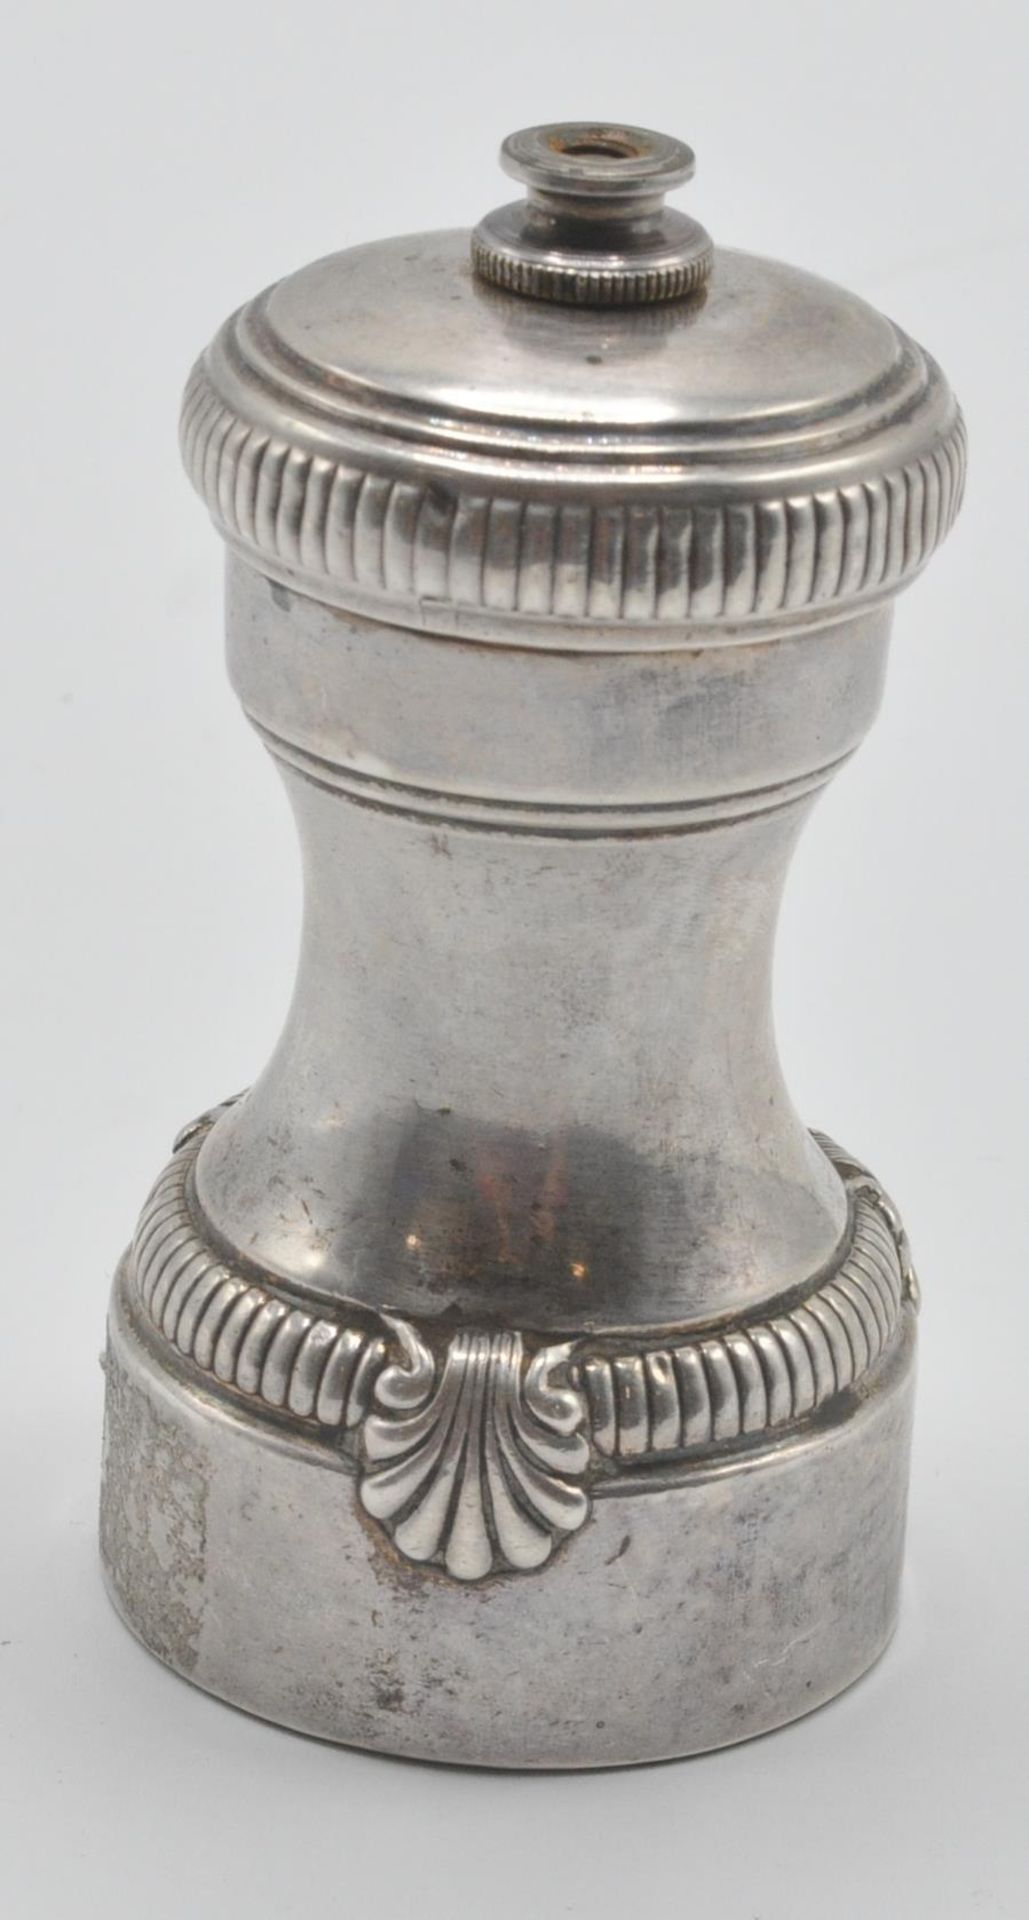 A 20th century French silver hallmarked pepper grinder having twist top with adjustable knob atop - Image 3 of 5